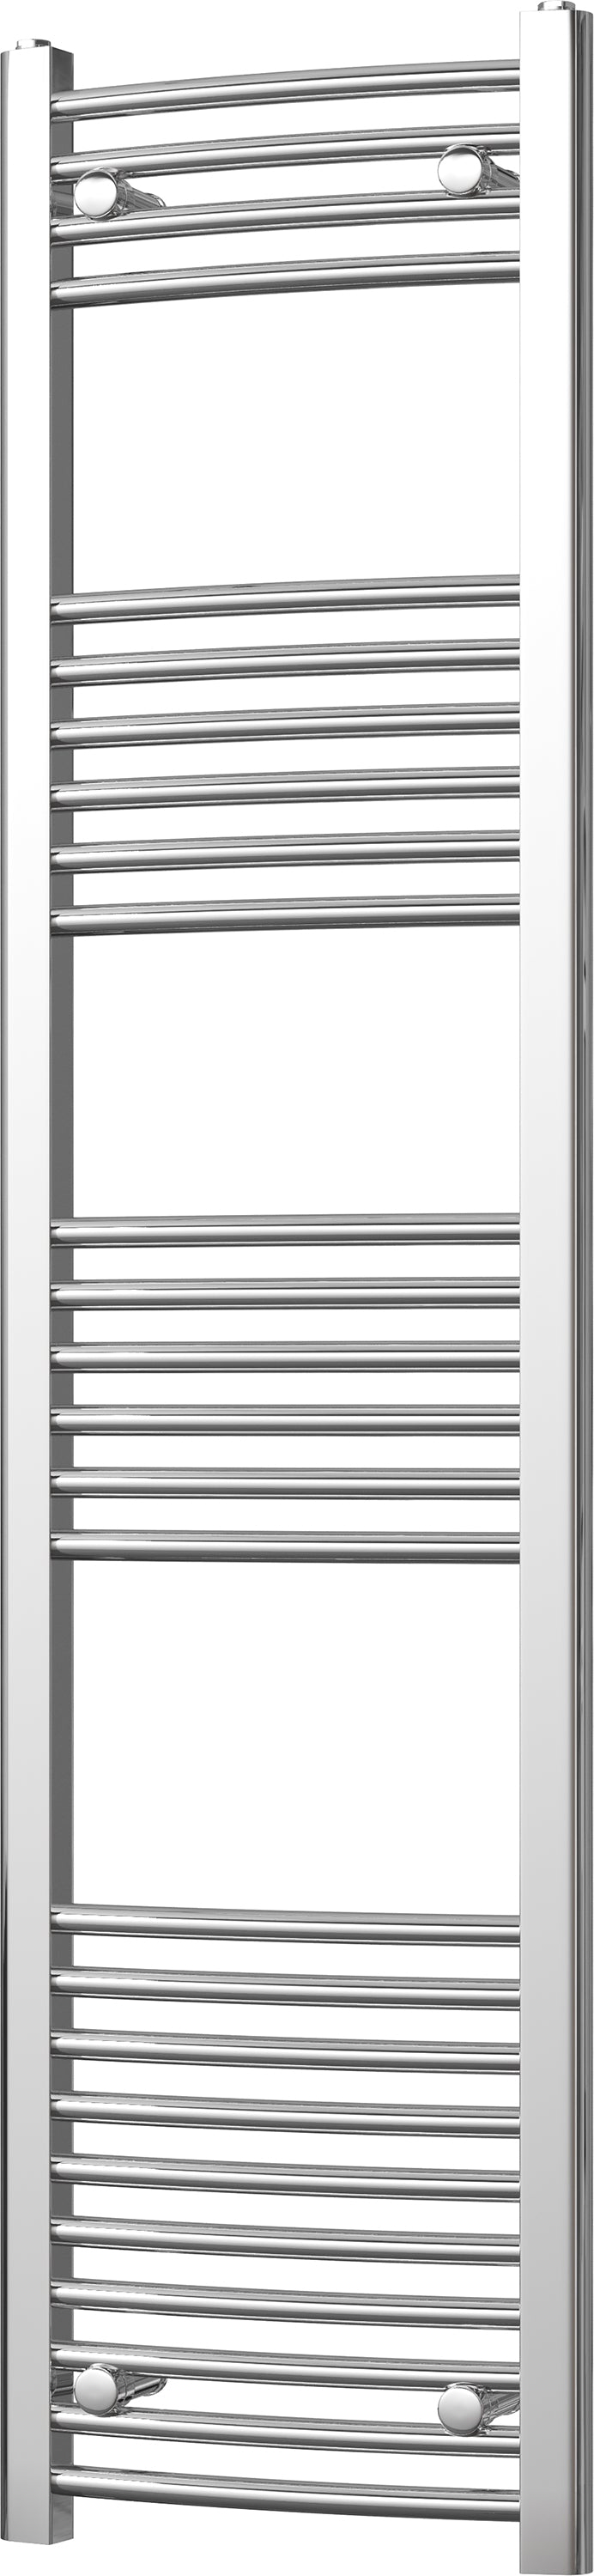 Zennor - Chrome Heated Towel Rail - H1600mm x W400mm - Curved